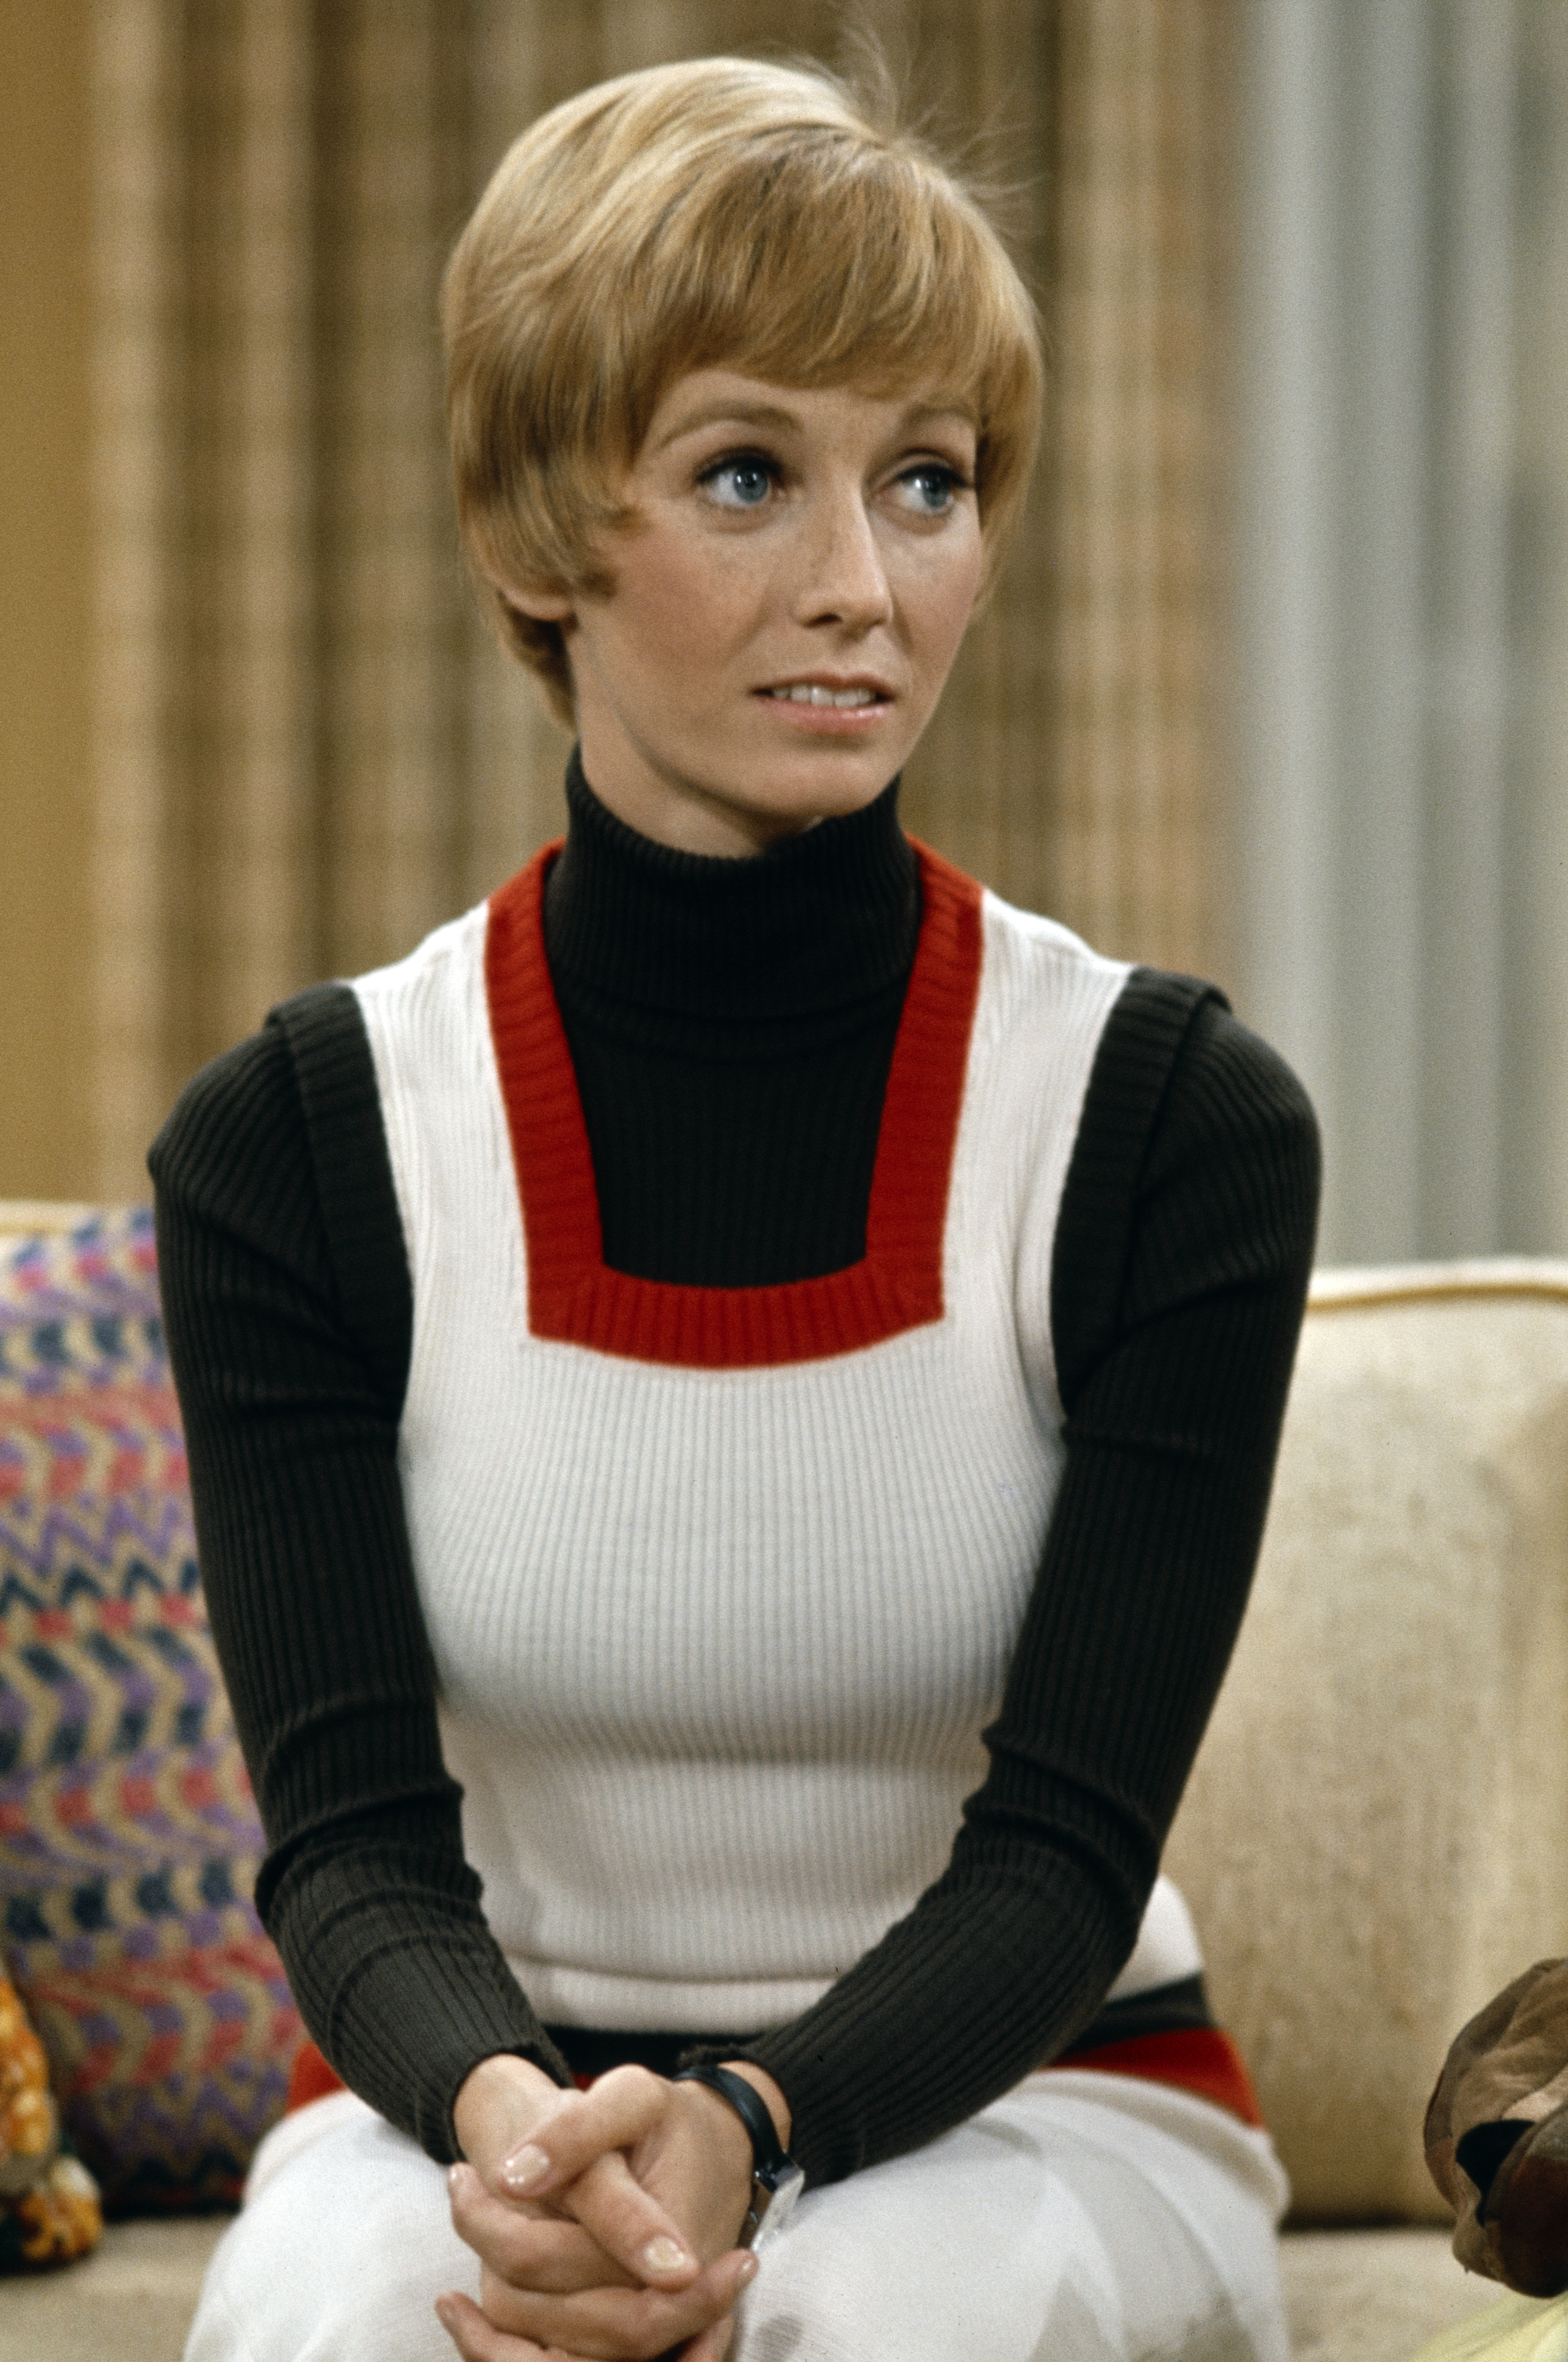 Sandy Duncan as seen in "The Sandy Duncan Show" | Source: Getty Images